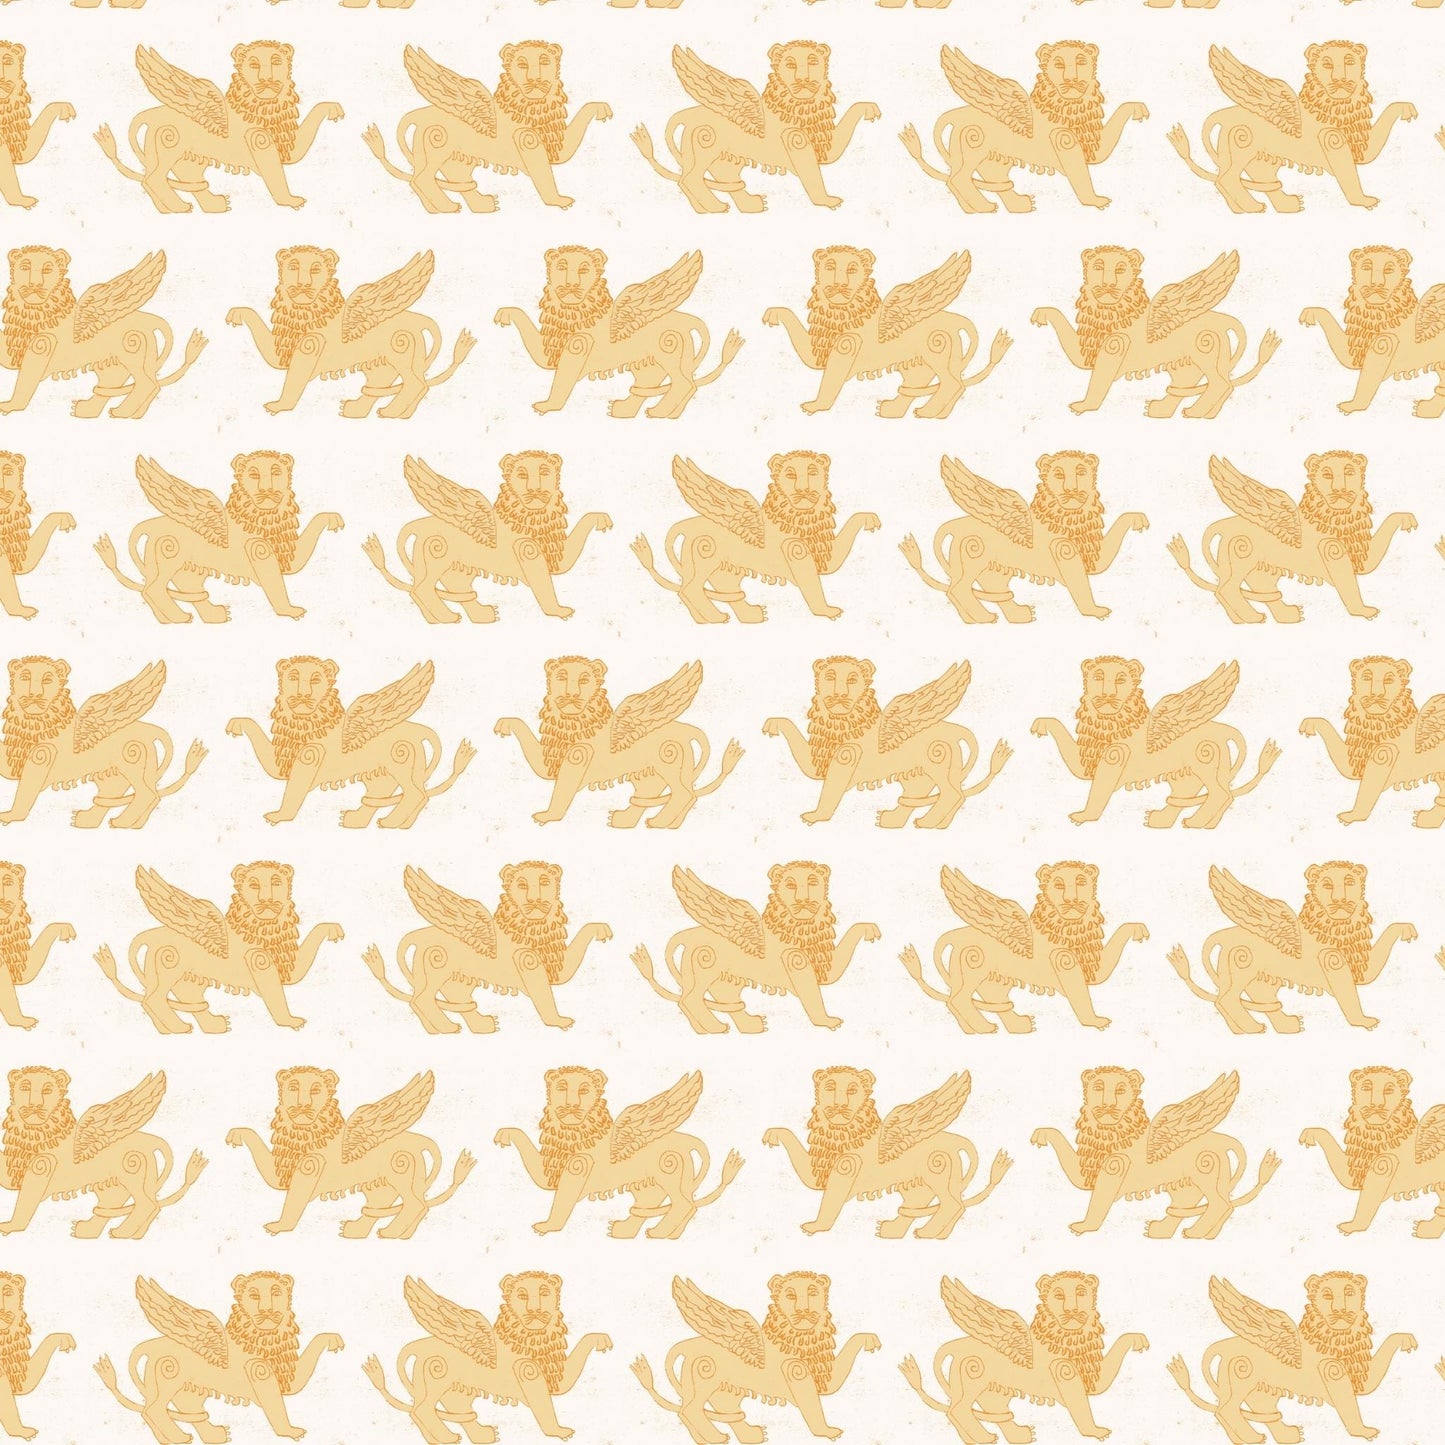 WALLPAPER ROLL - Large Scale Repeat Winged Lion Wallpaper - Mustard